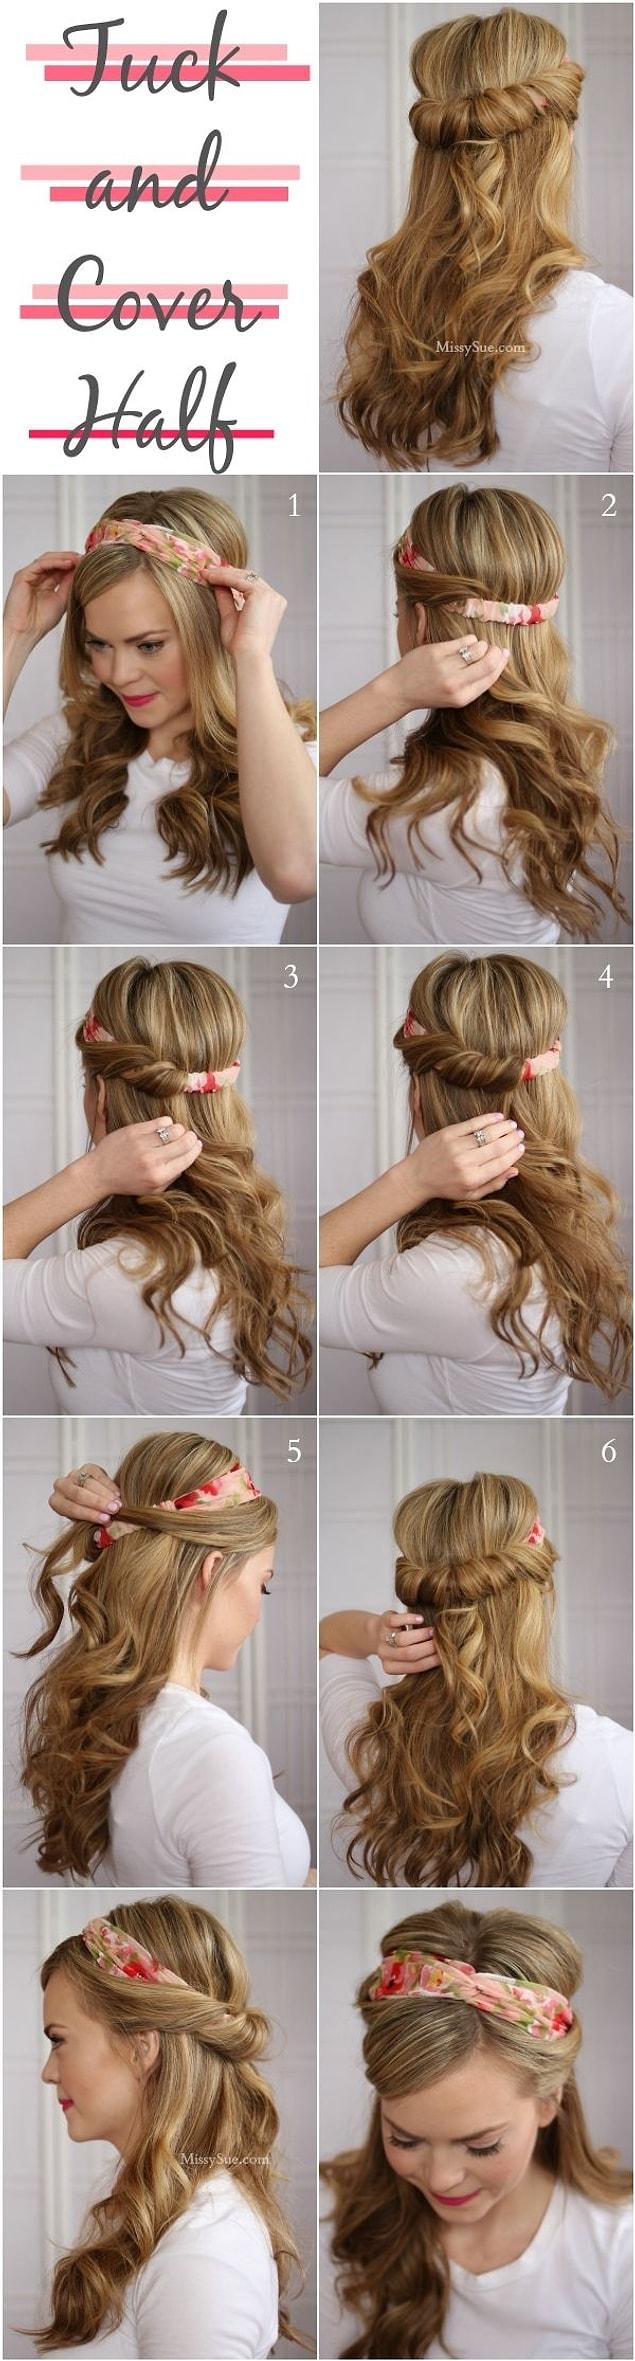 6. Or you can twist and tuck your hair into a hairband to cover it.